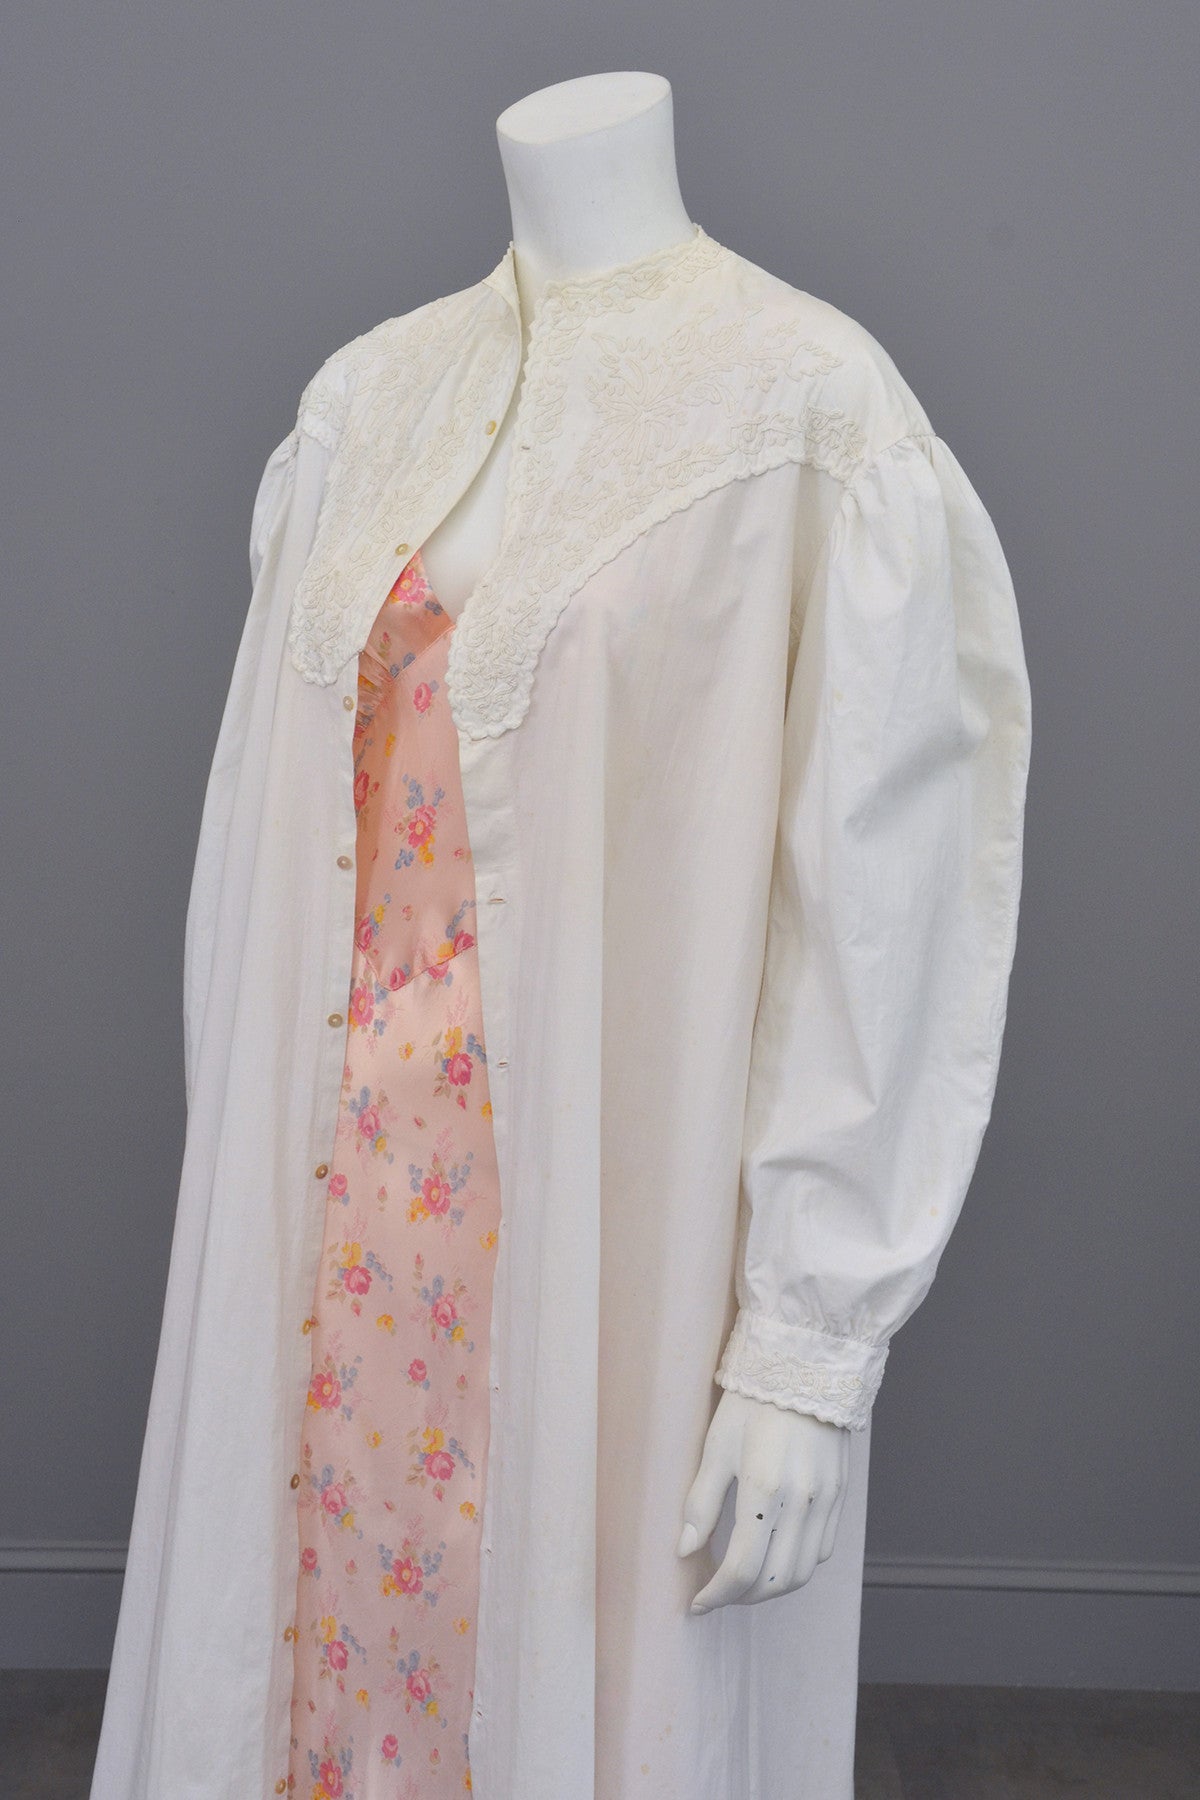 Edwardian Victorian Soutache Embroidered White Cotton 'Lab' Coat Robe Duster